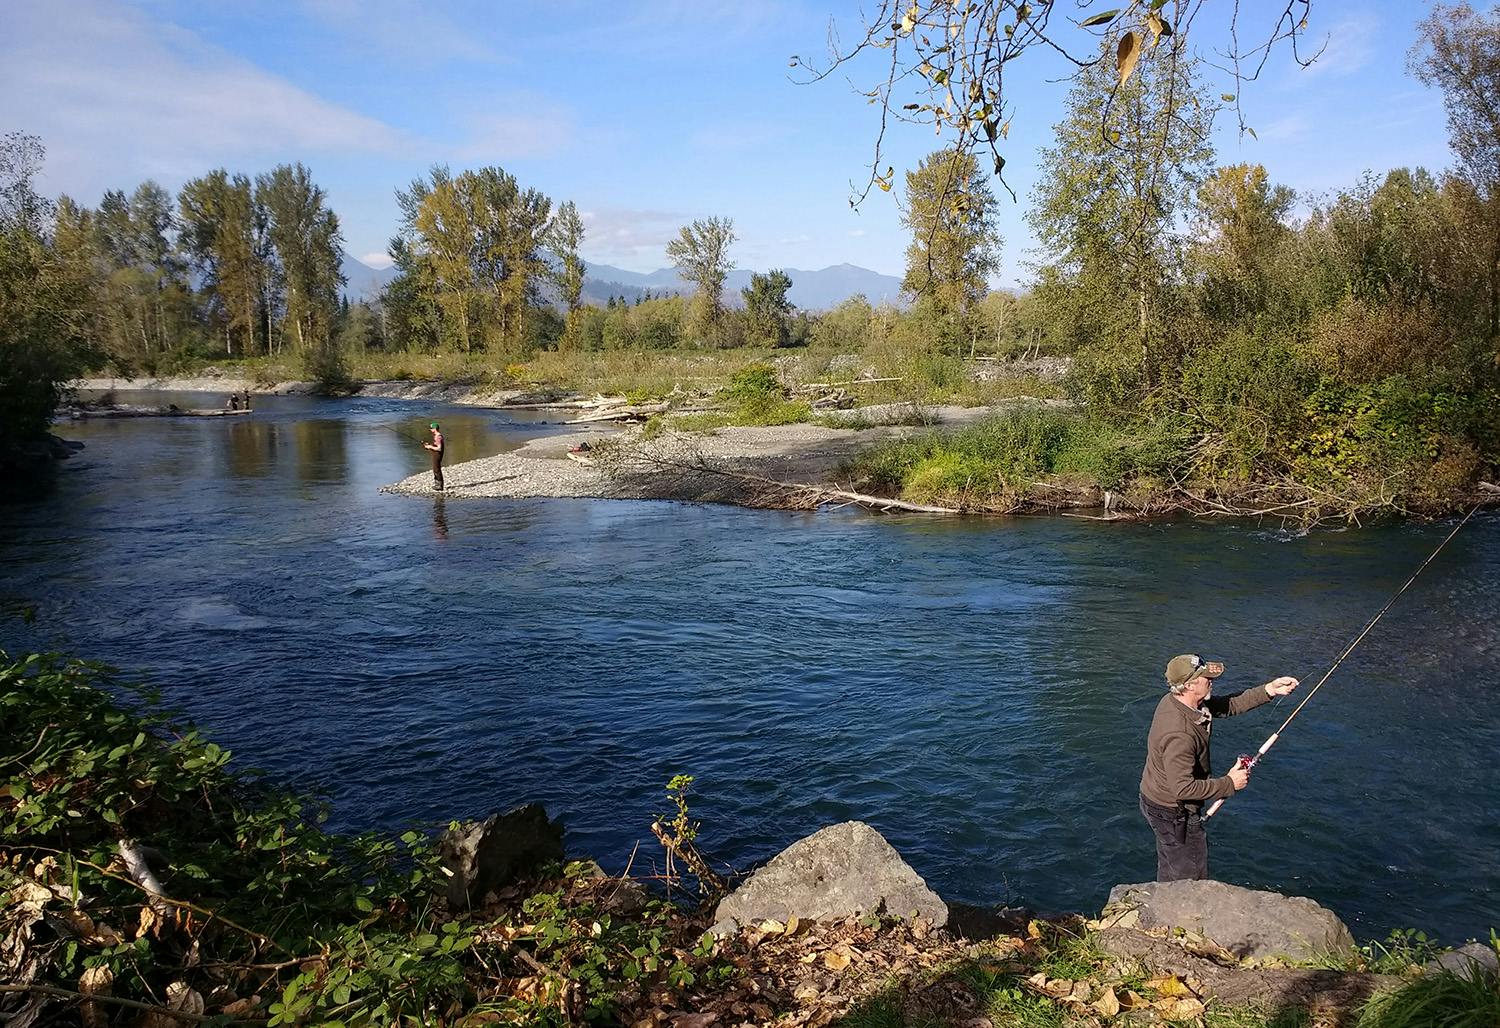 Two people fish in the Vedder River